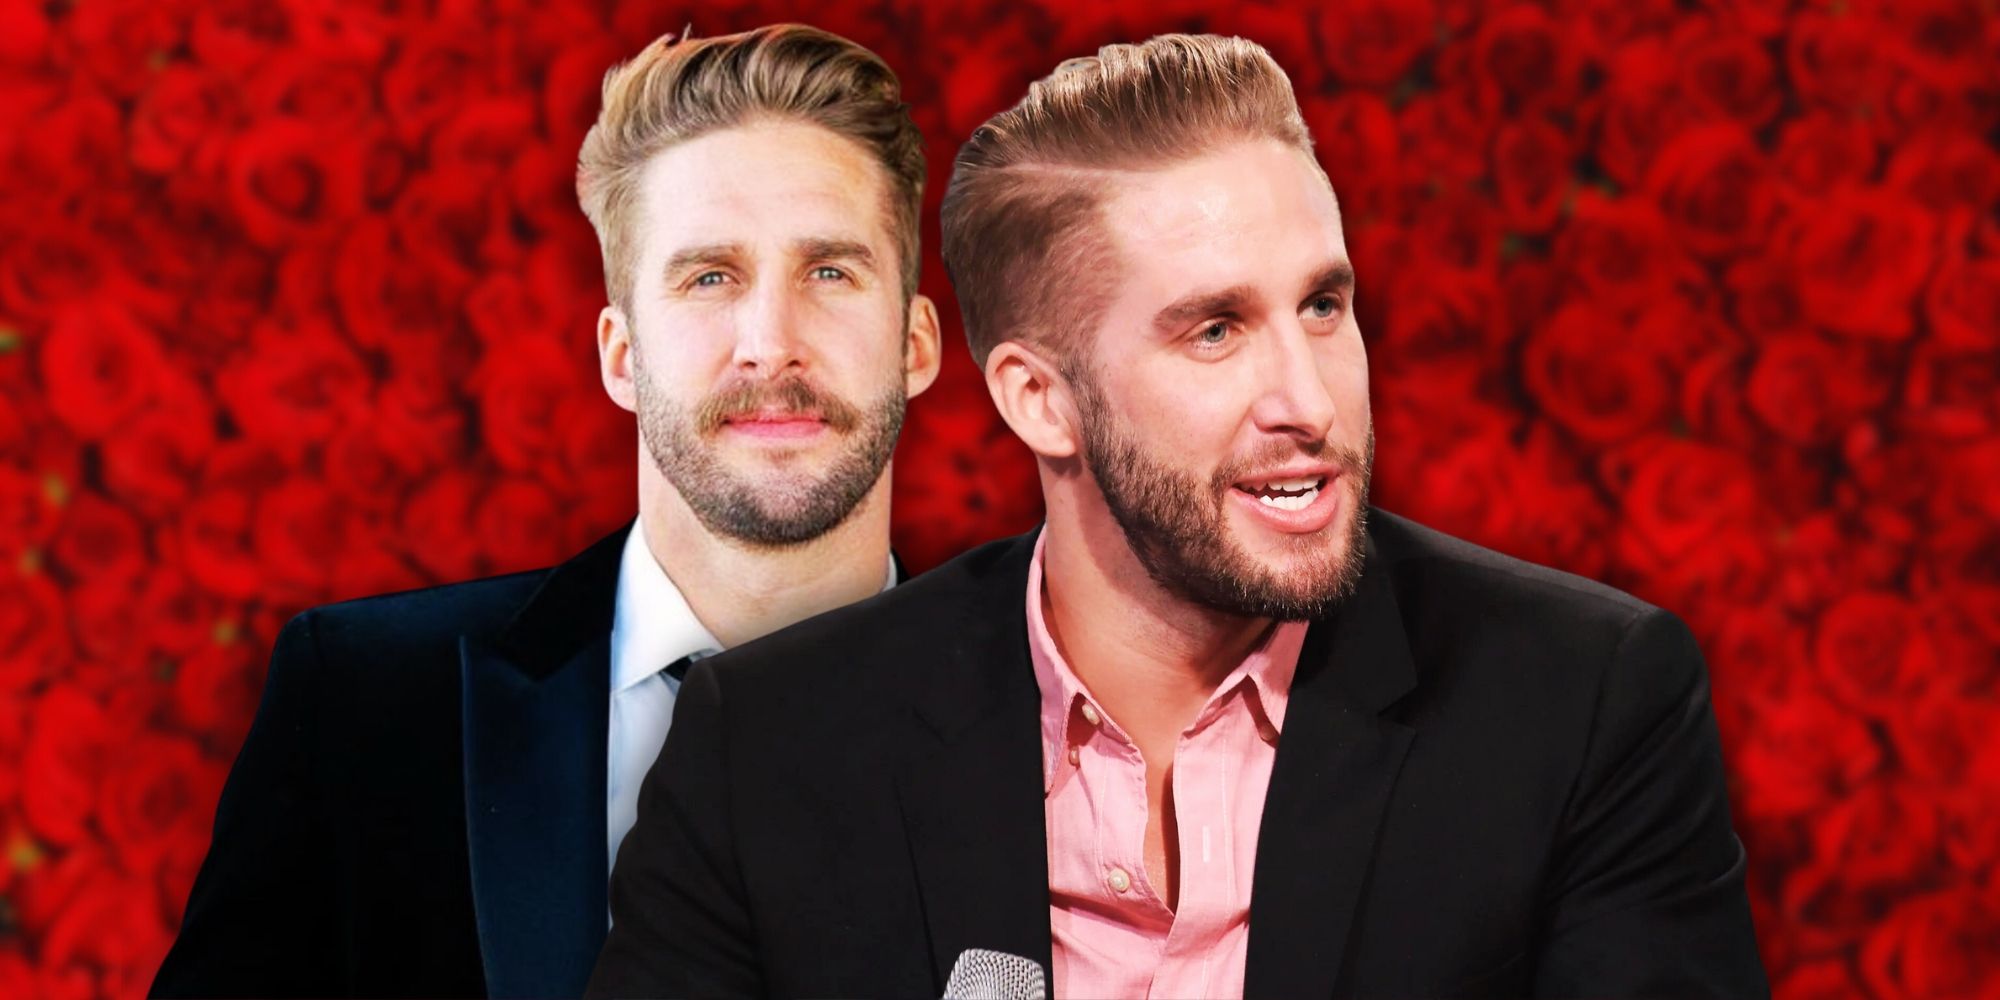 Montage of Bachelorette's Shawn Booth